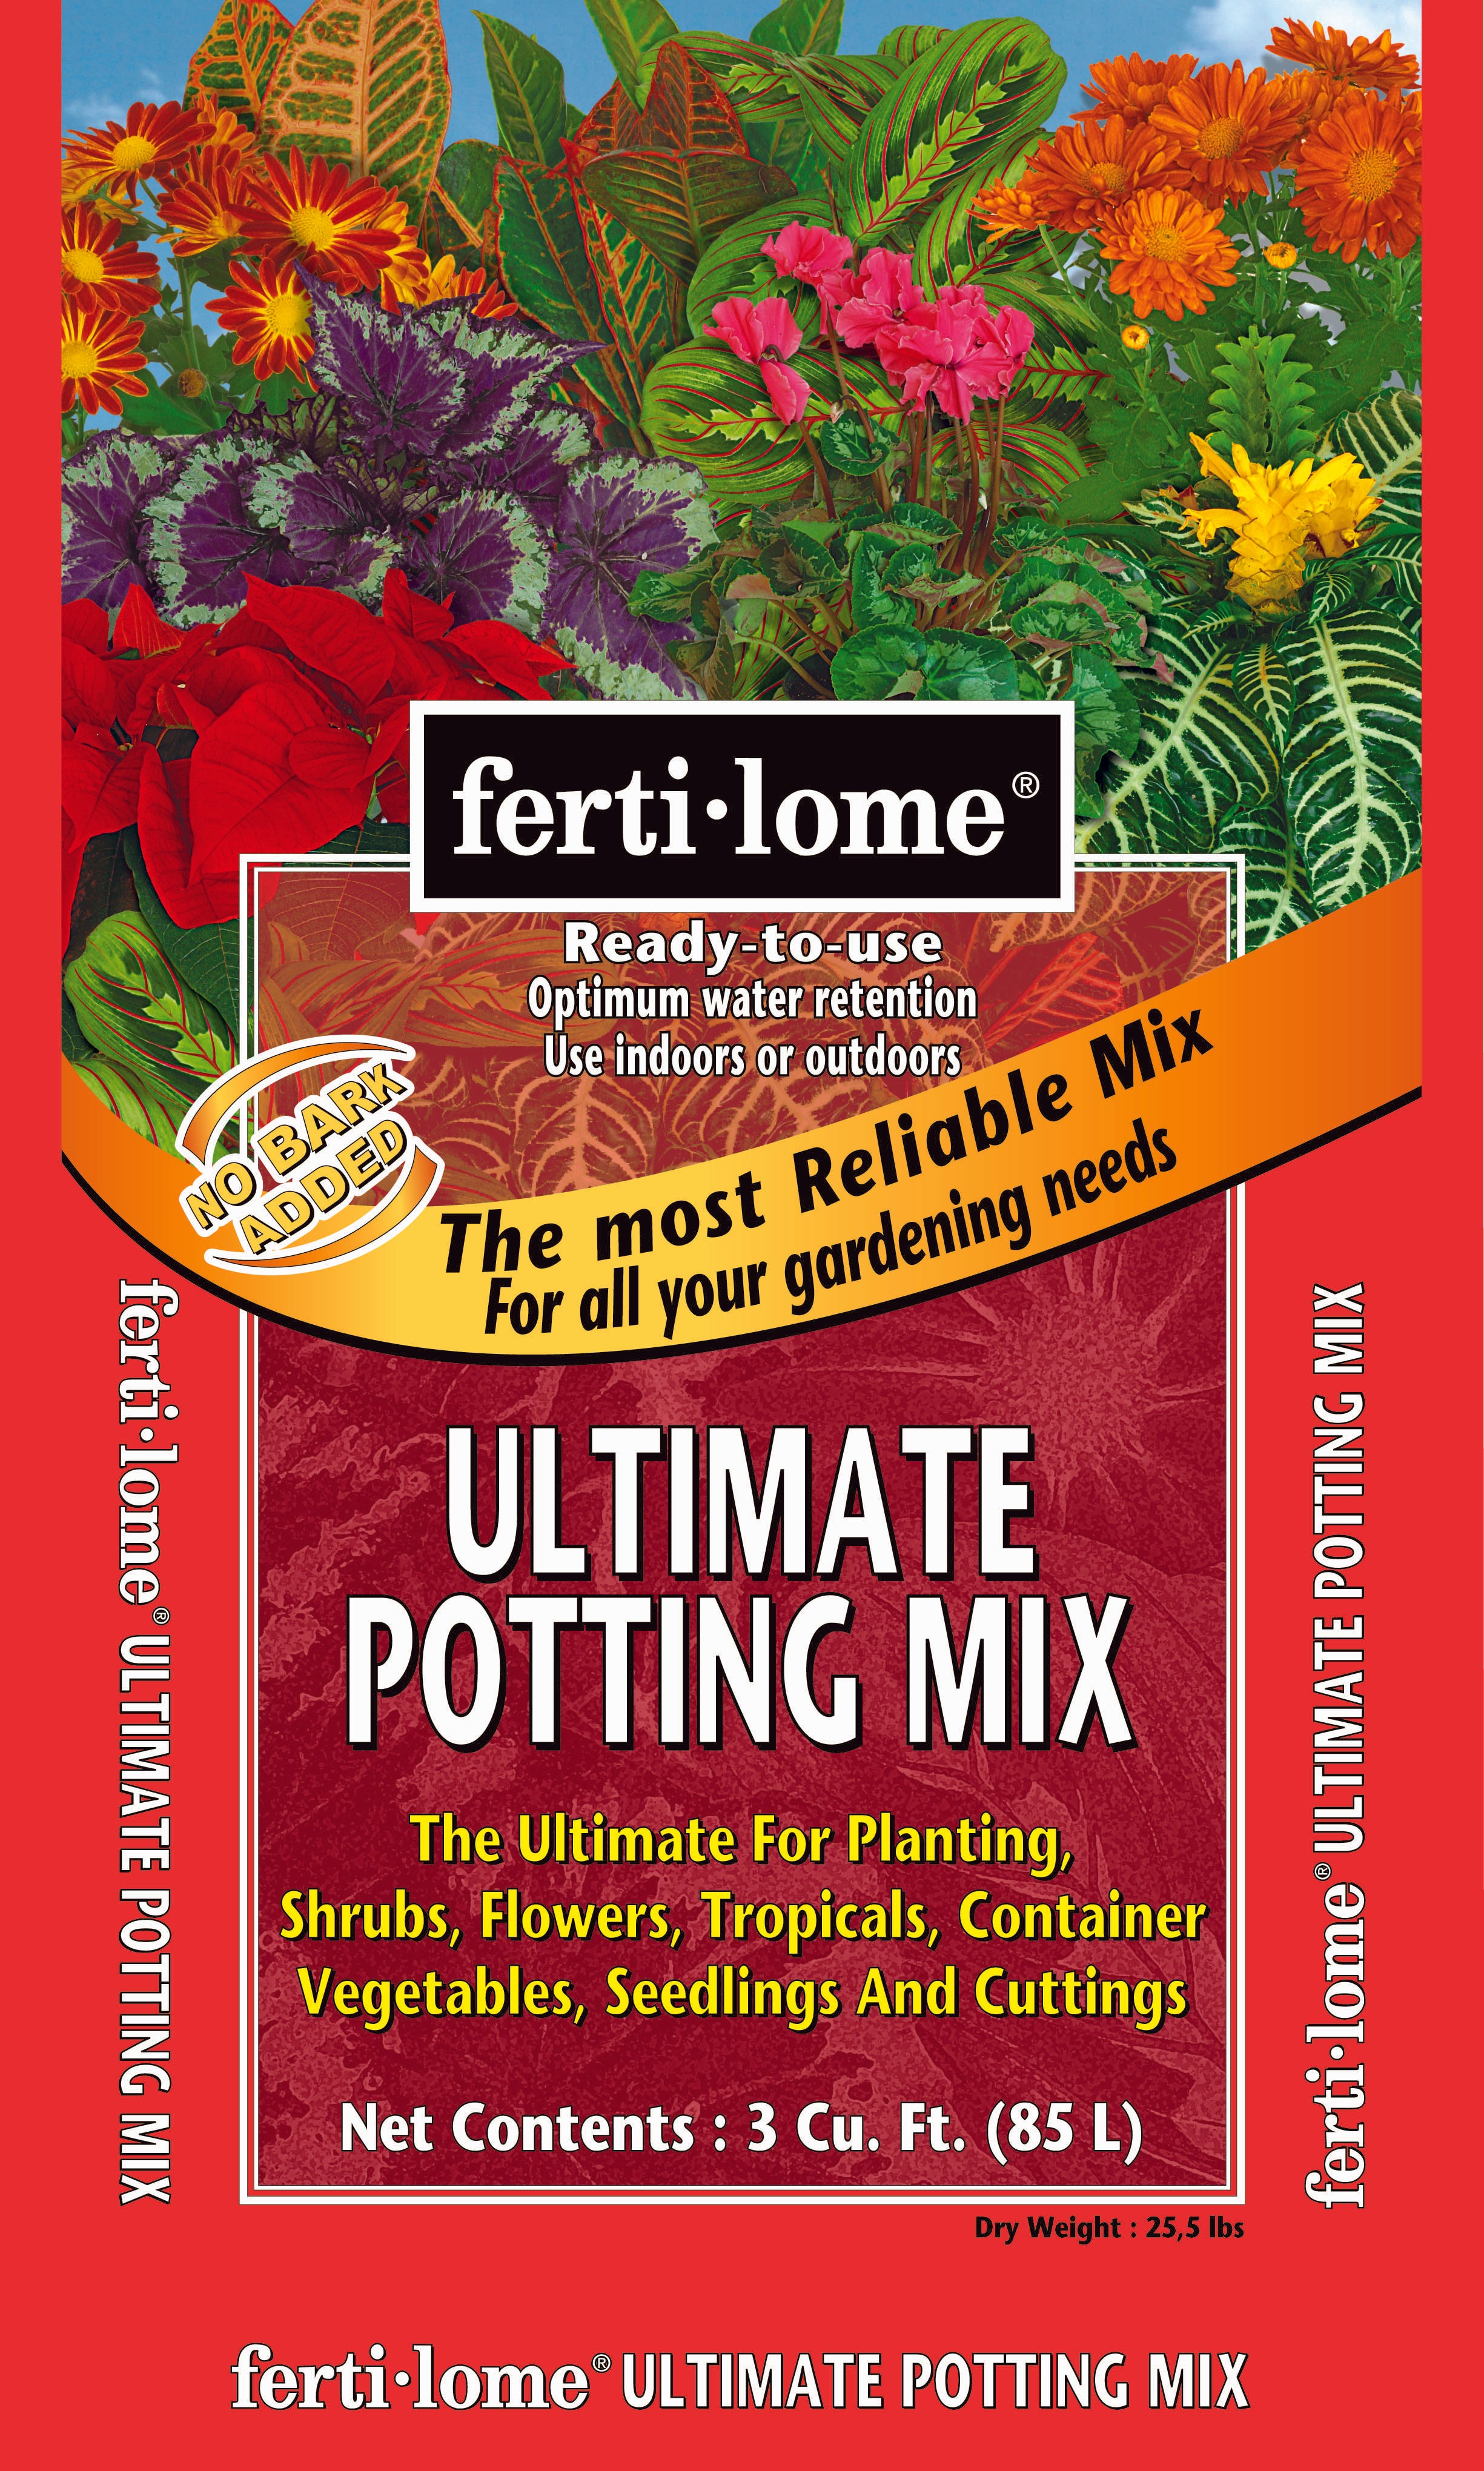 Fertilome Ultimate Potting Mix and Seed Starter